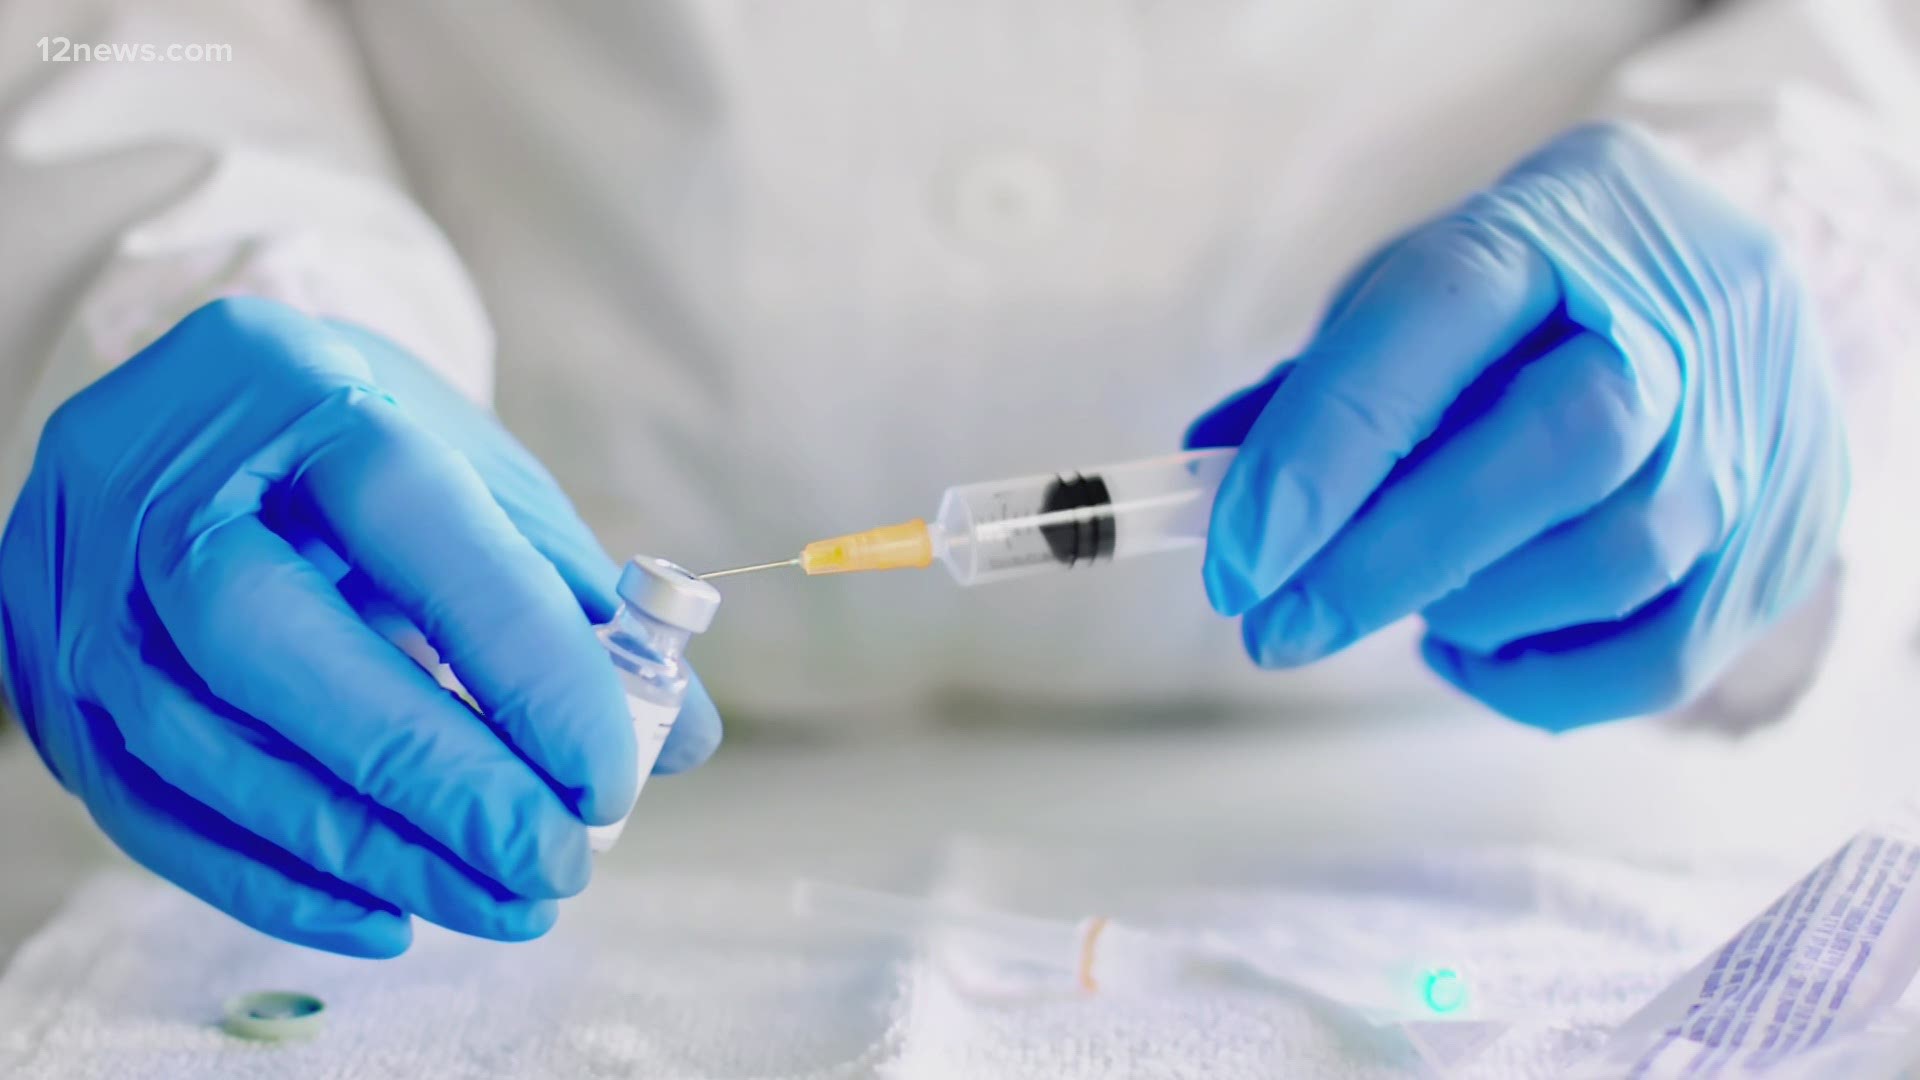 Companies around the world are racing to develop a COVID-19 vaccine. Many are nearing the final trial phase. How effective does a vaccine need to be to get approval?